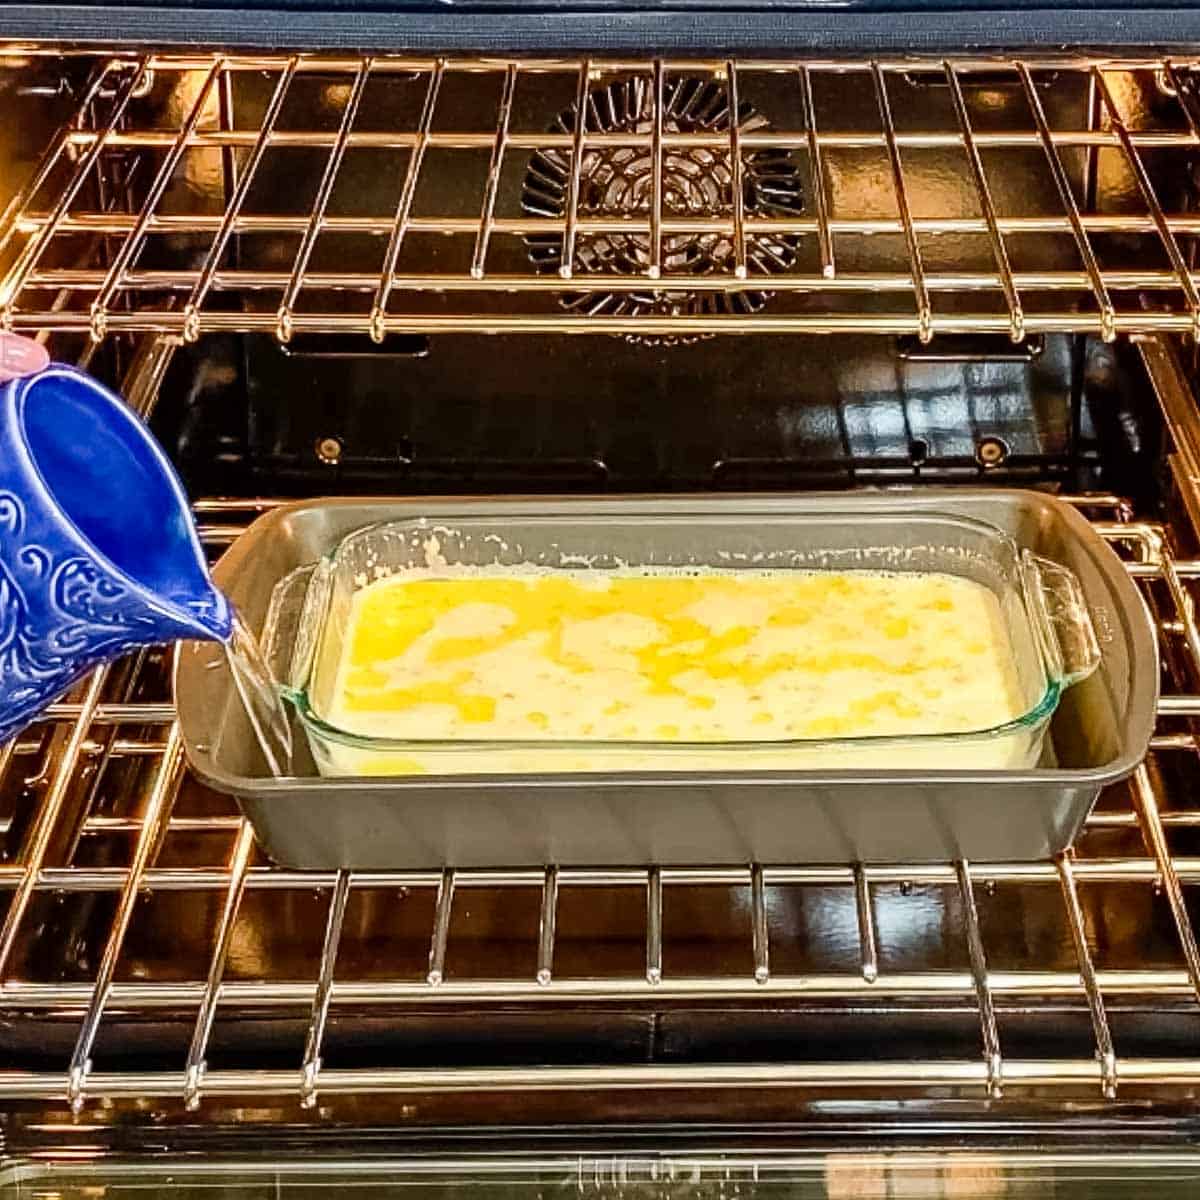 Corn pudding inside baking dish in oven with person pouring water into second outer baking dish